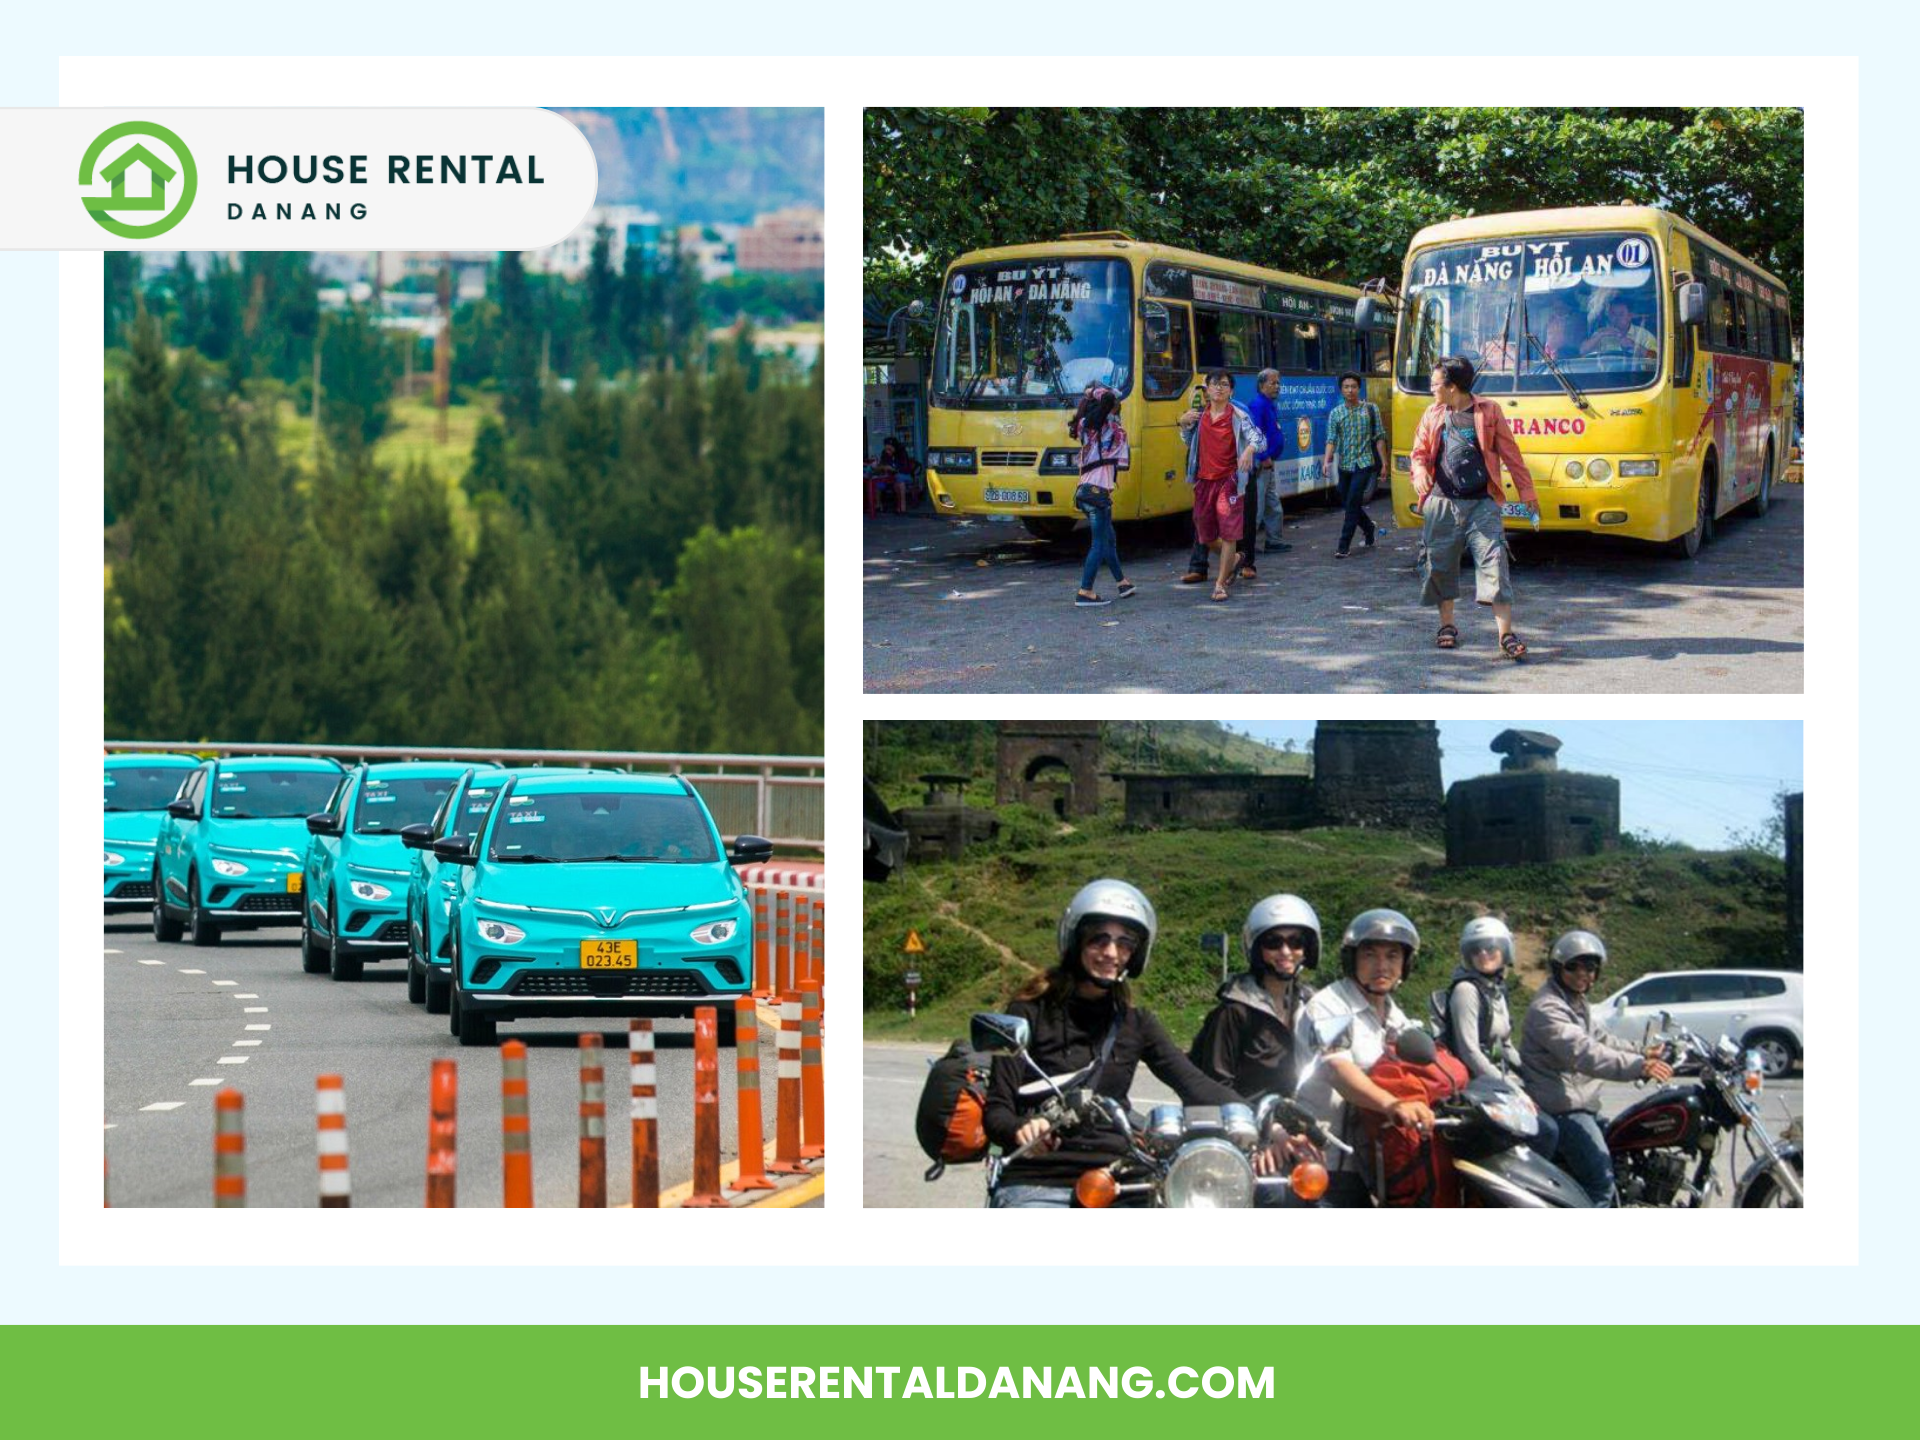 Collage showing transportation options: electric taxis, yellow public buses, and motorbikes with riders on a road. "House Rental Danang" logo and website URL at the top and bottom of the image. Background hints at the scenic Marble Mountains Danang.